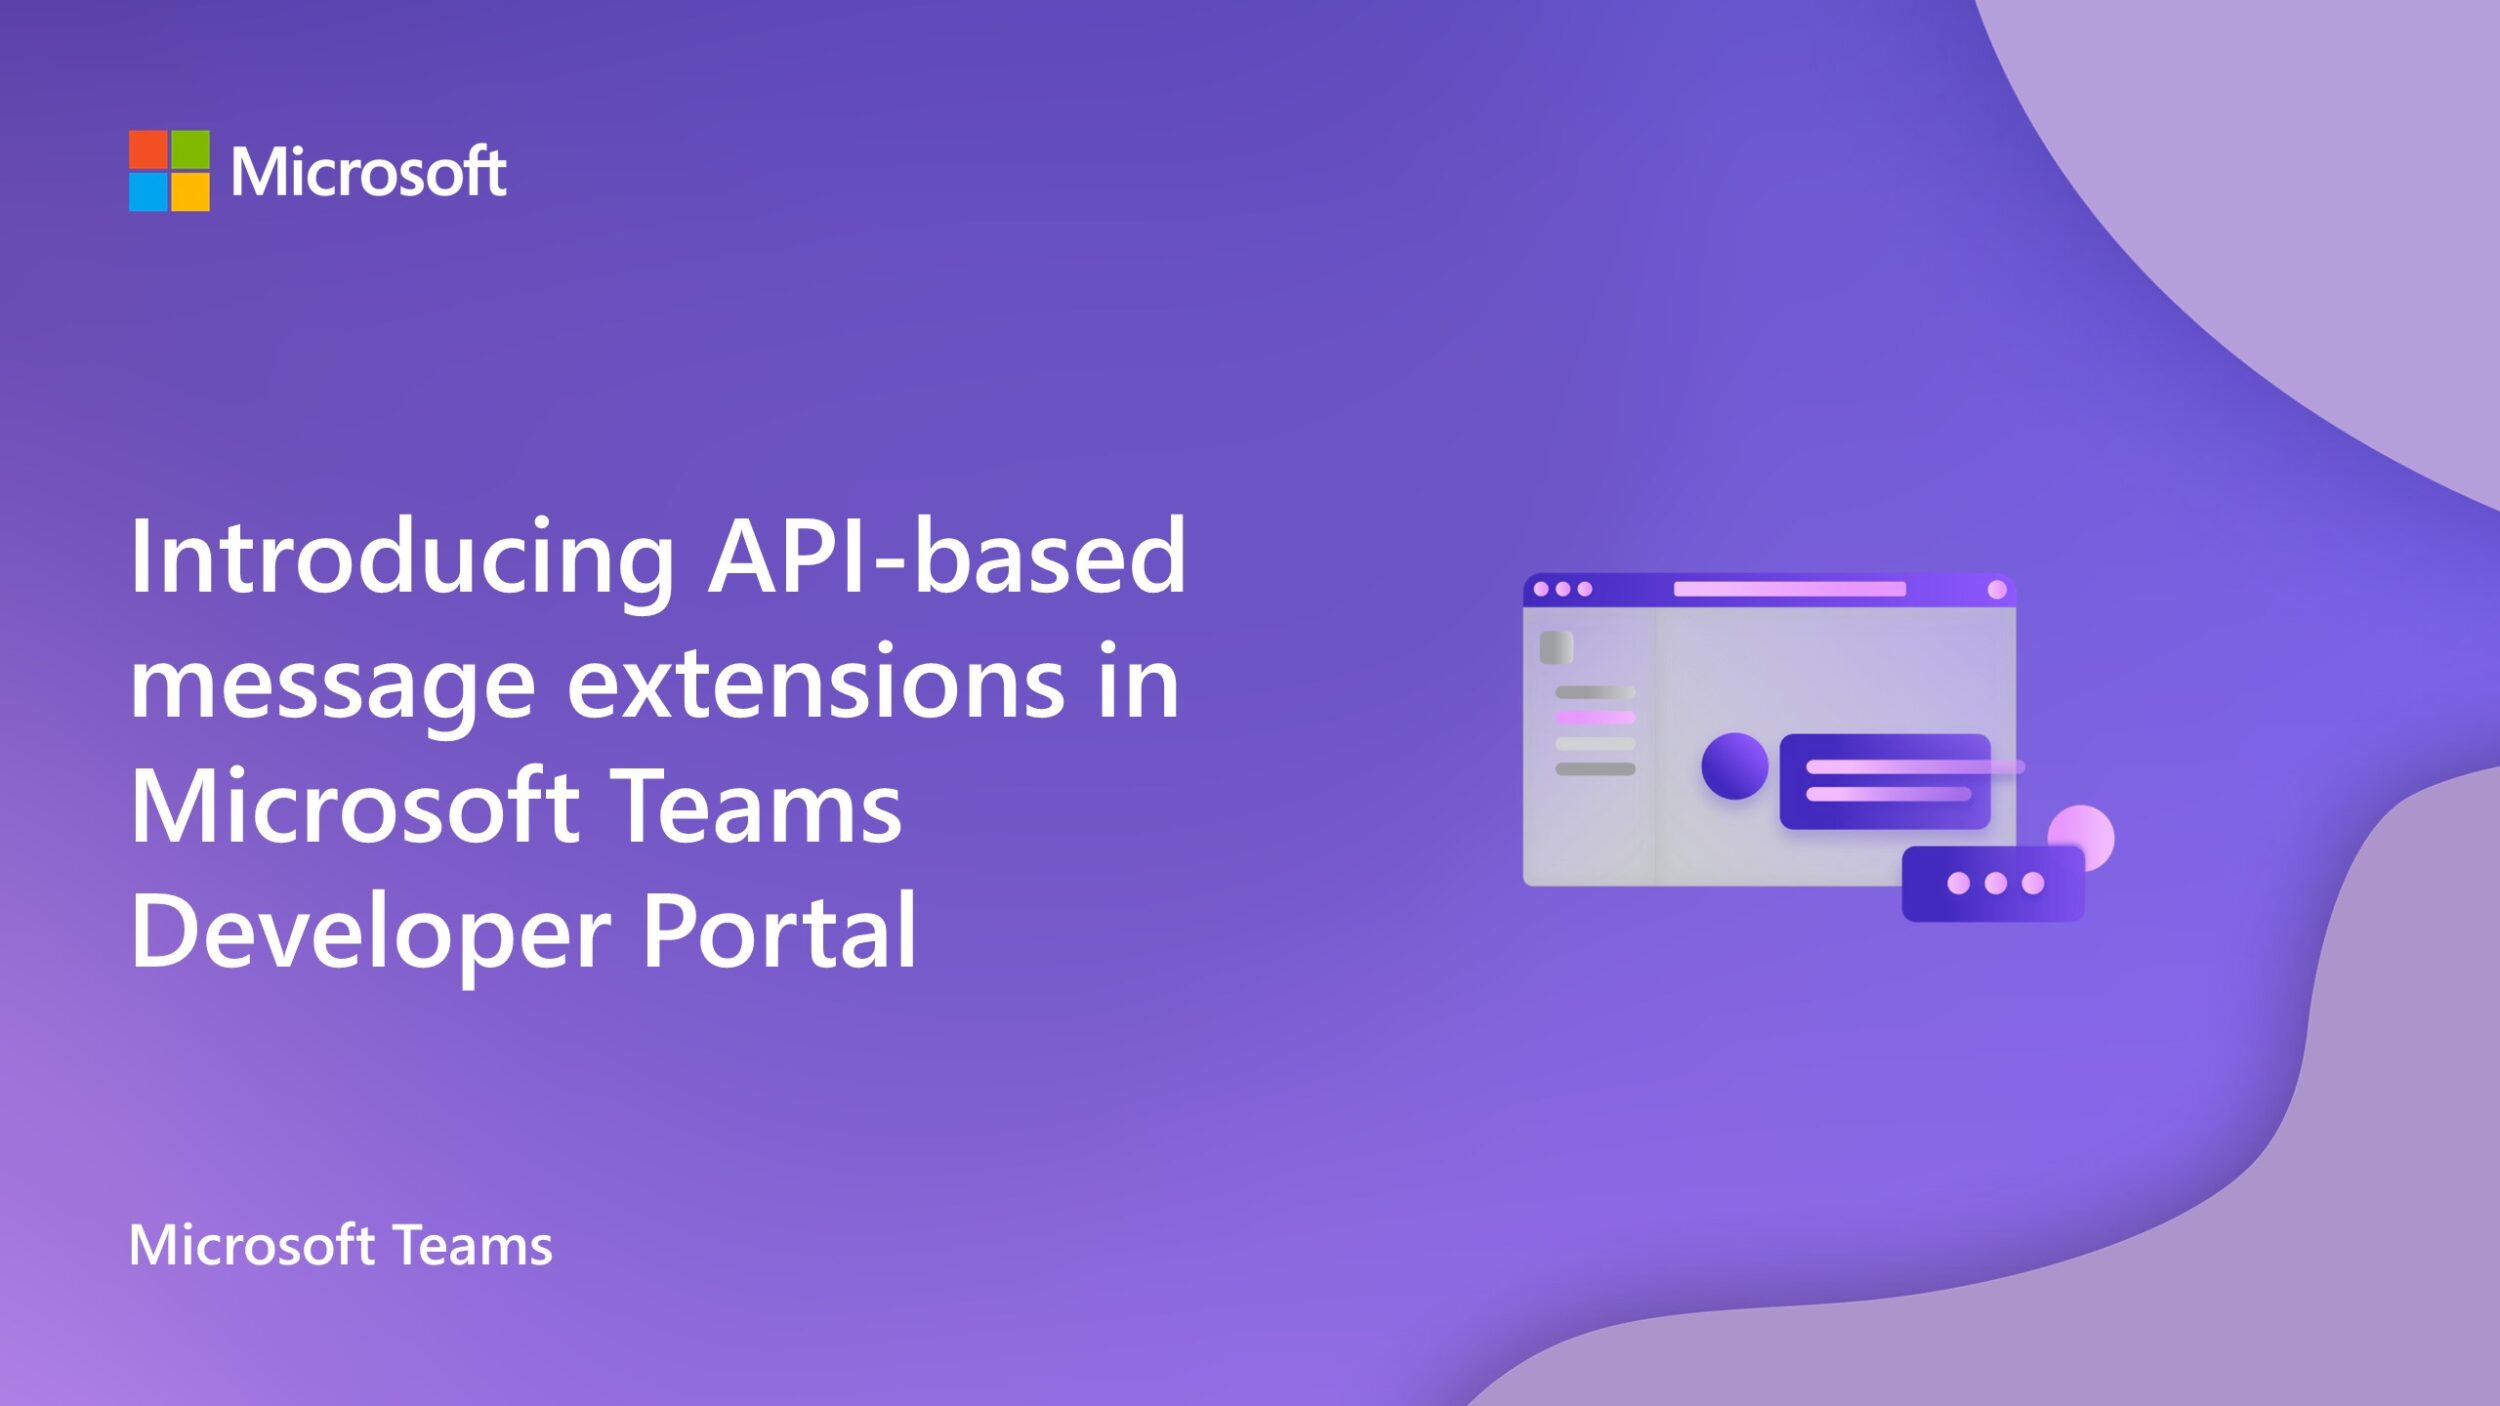 Introducing API-based message extensions in Microsoft Teams Developer Portal